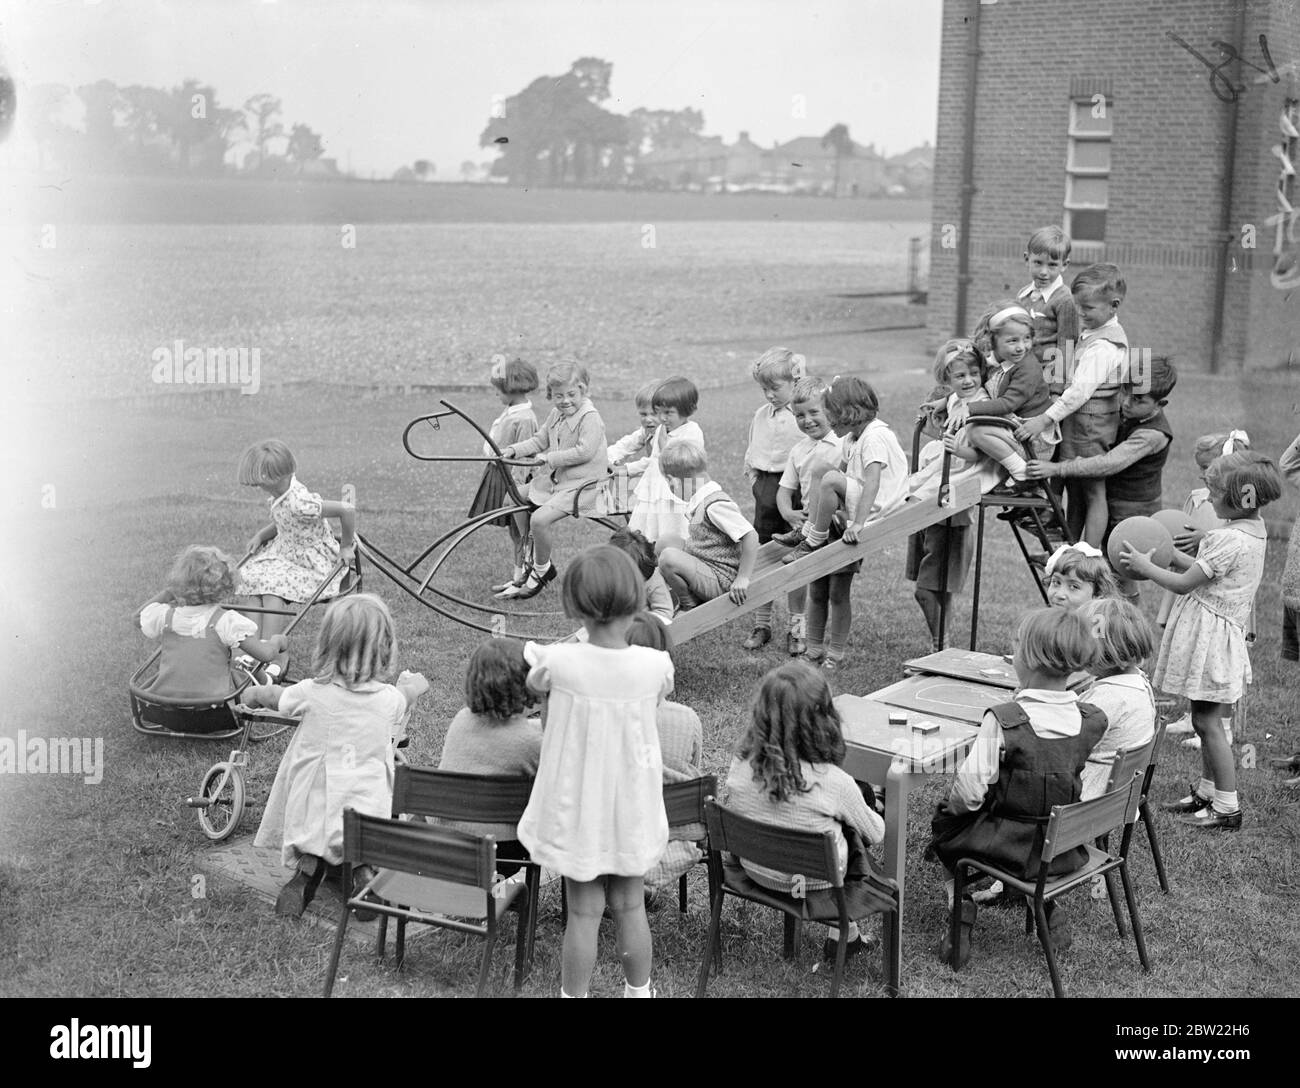 Children at lessons while others play on the fun apparatus. The new Torbett the elementary school has been opened at Ilford. With accommodation 5000 children school has two holes to film projection rooms, wireless equipment with loudspeakers in every room, and a tiny tots department with rocking horses helter-skelter is very cycles a subway is being constructed under the road and five points to give children access into the playground safety the school cost 40,000 build. 13 September 1937. Stock Photo